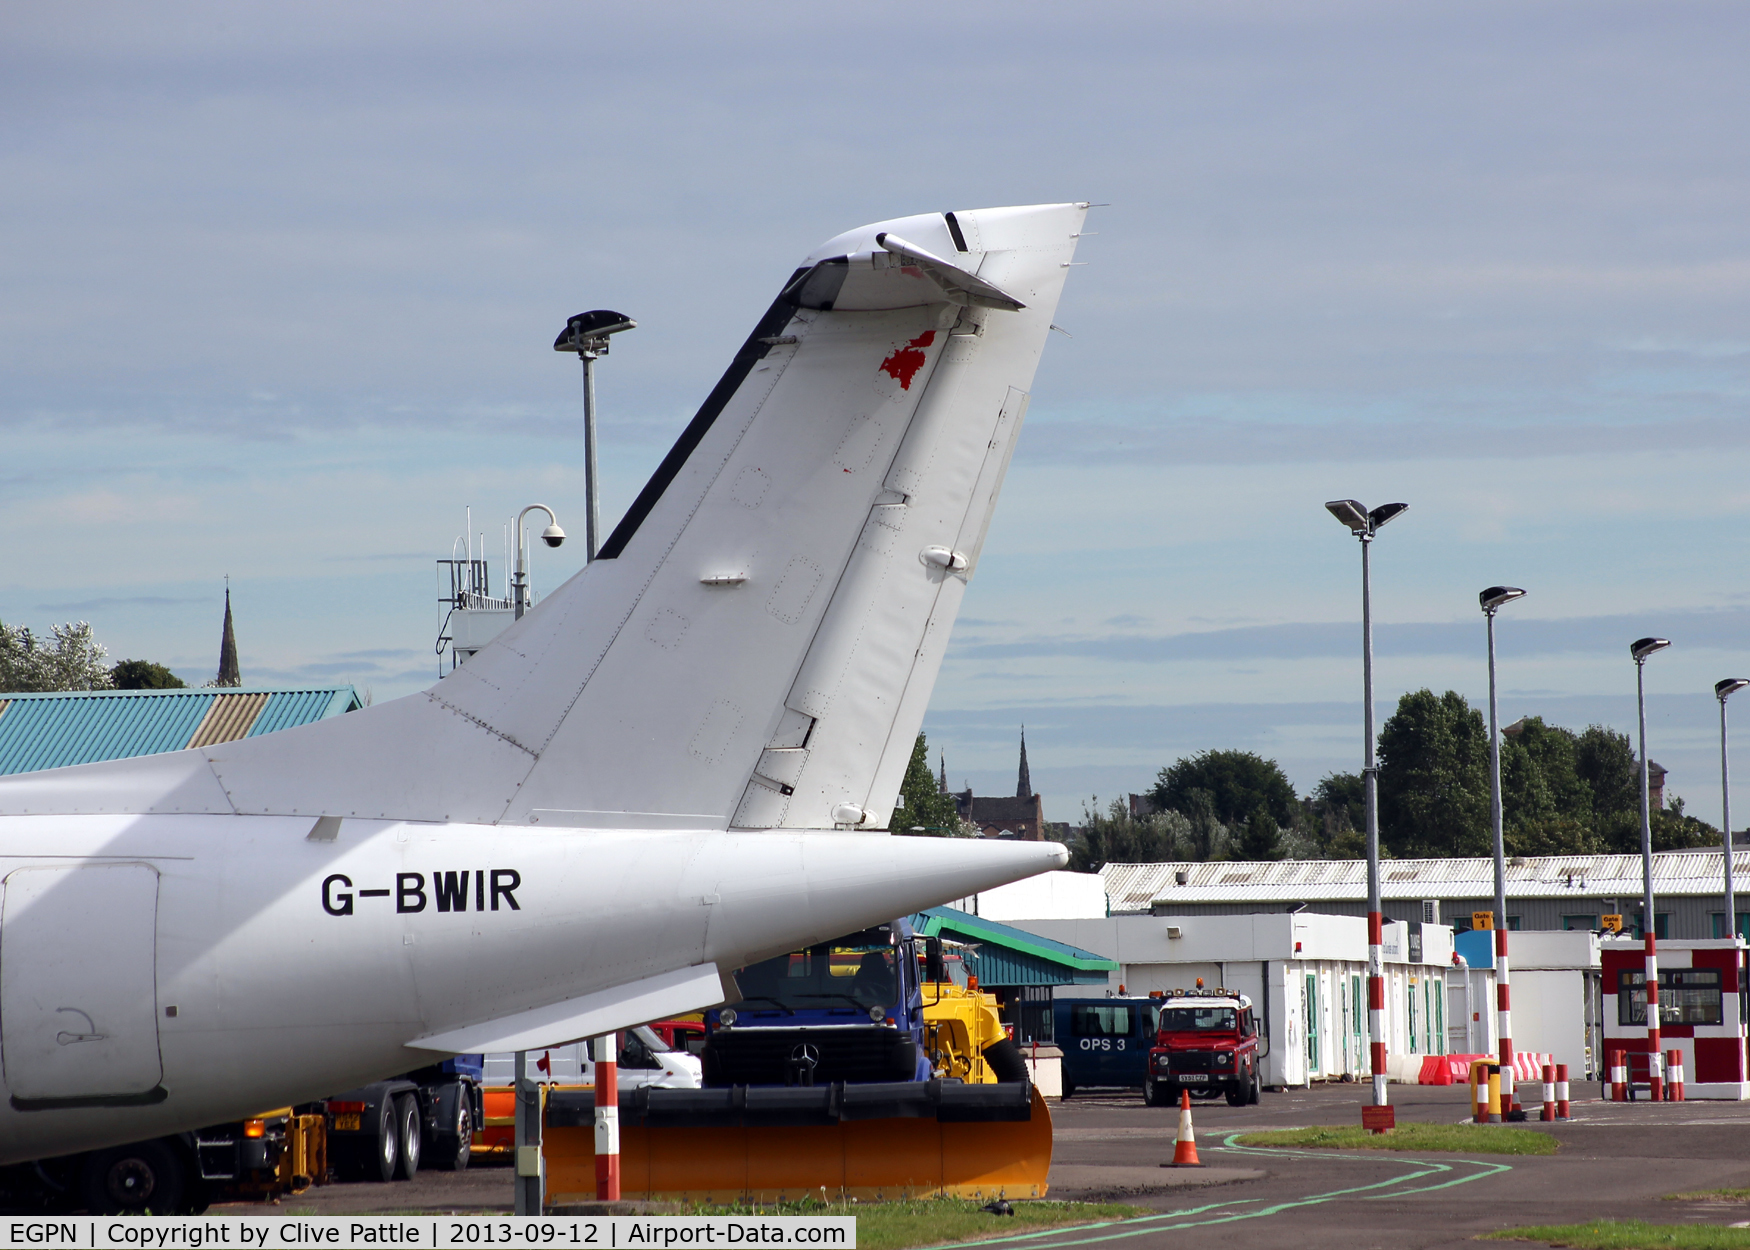 Dundee Airport, Dundee, Scotland United Kingdom (EGPN) - A view of the maintenance area at Dundee Riverside, with the tail of a Dornier 328 parked at the Loganair/Flybe engineering facility at the airport.